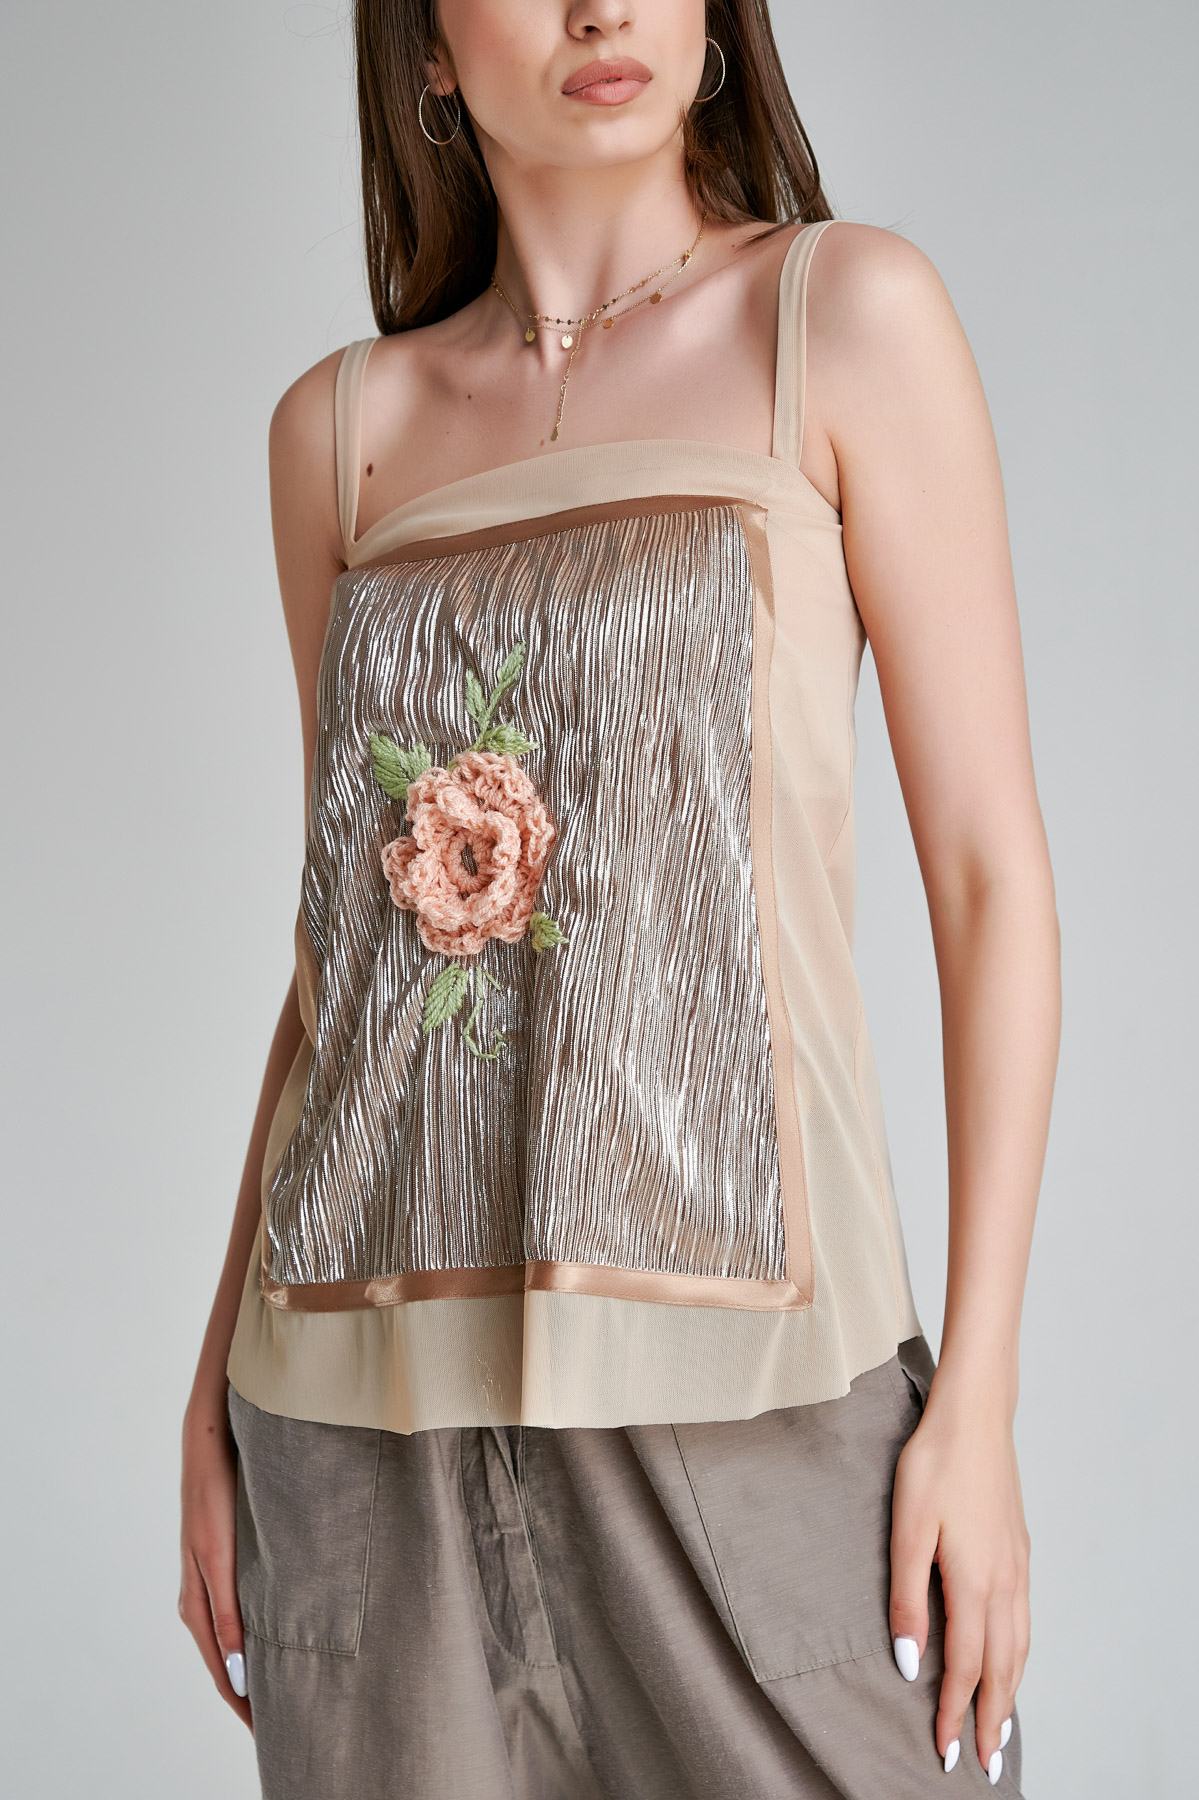 AXEL top beige with spaghetti straps and floral embroidery. Natural fabrics, original design, handmade embroidery